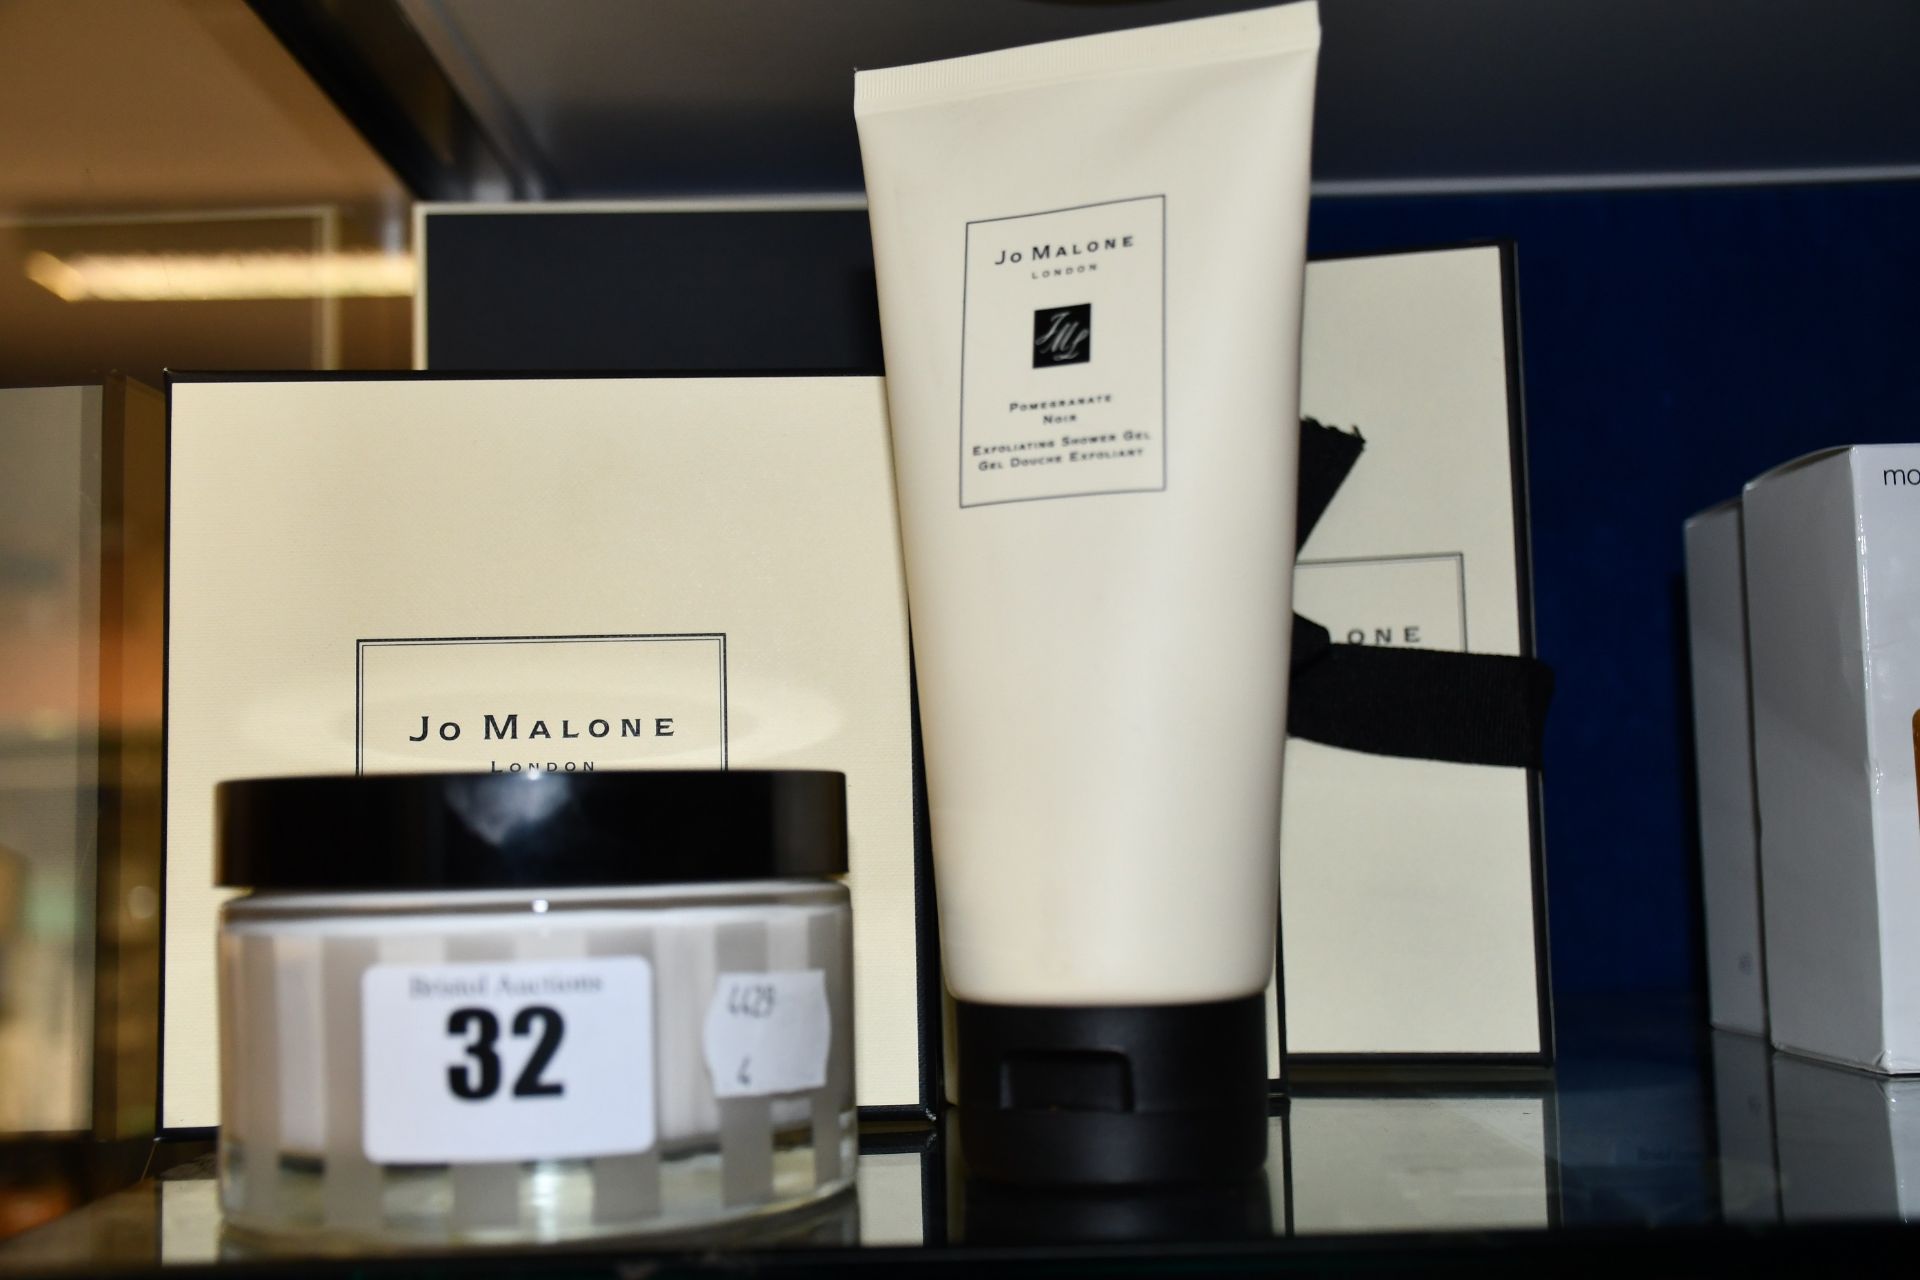 Seven Jo Malone items to include body creams, hand and body wash gels, cologne and shower gel.